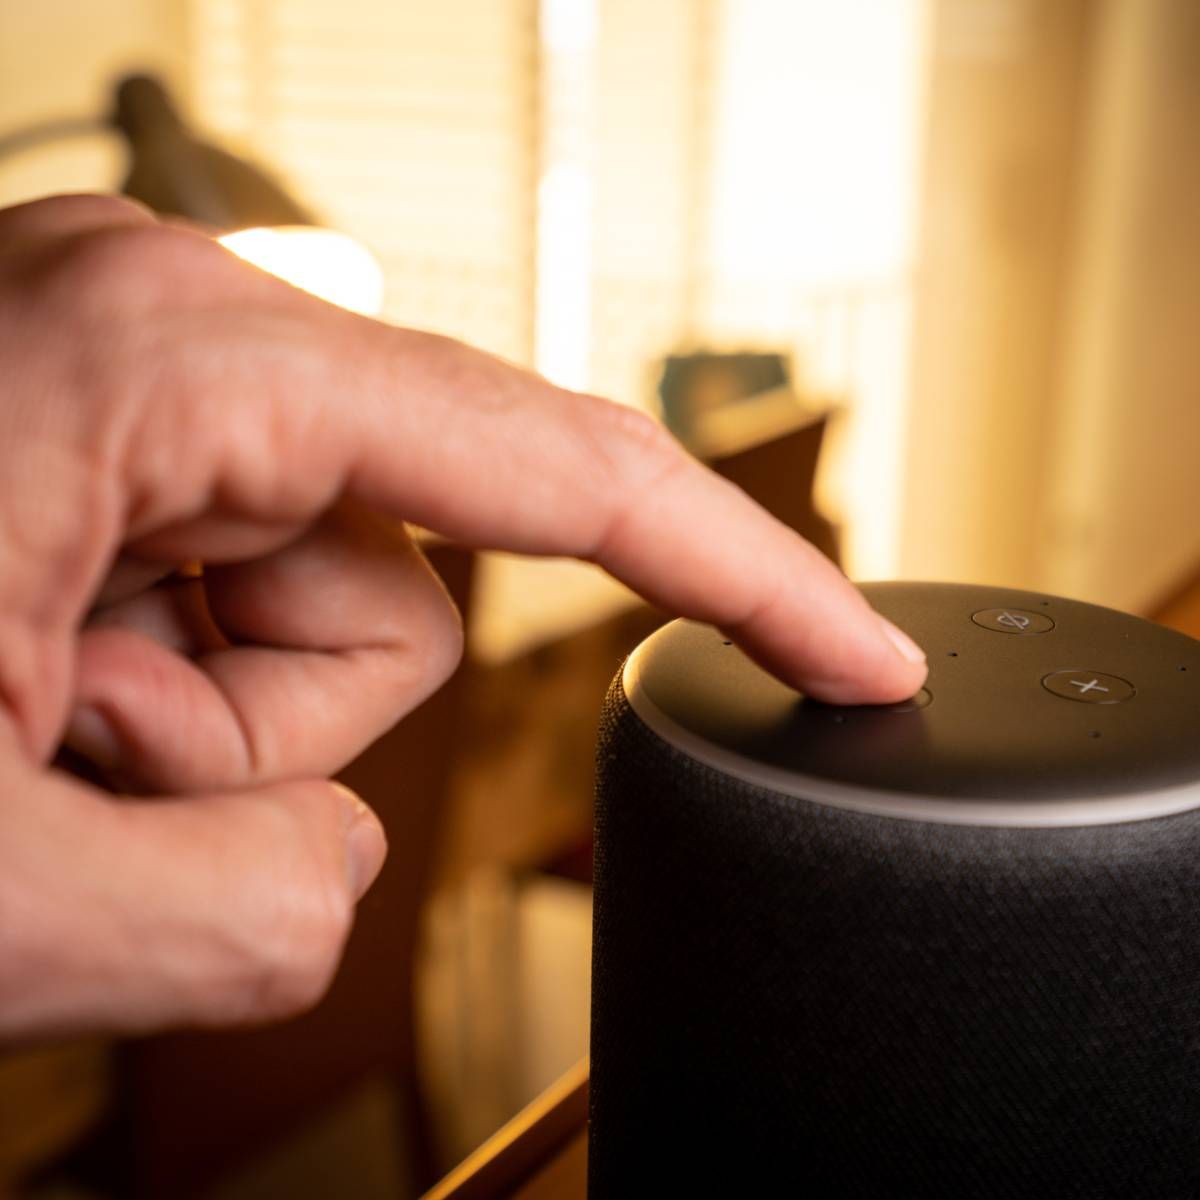 A hand pressing the voice control button on an Amazon Echo.